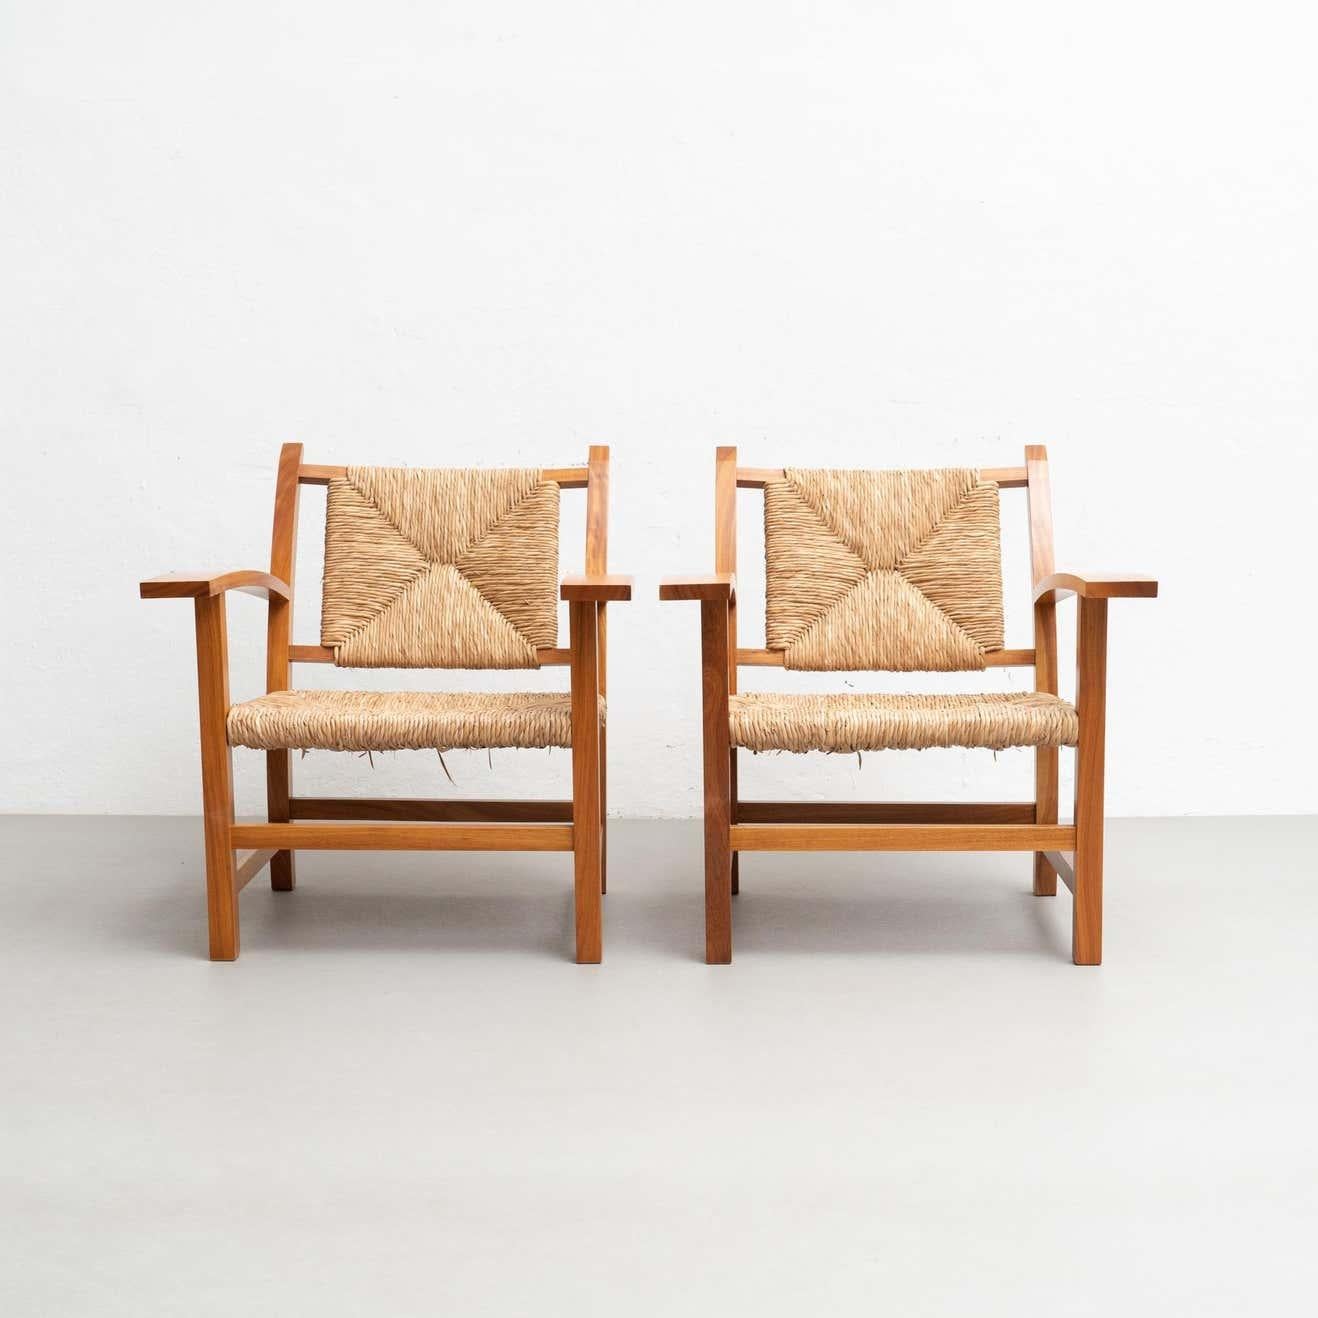 Set of two reedited armchairs after Josep Torres Clave.

Manufactured in Spain, circa 1987.

Materials:
Wood and rattan

In great original condition, with minor wear consistent with age and use, preserving a beautiful patina.

